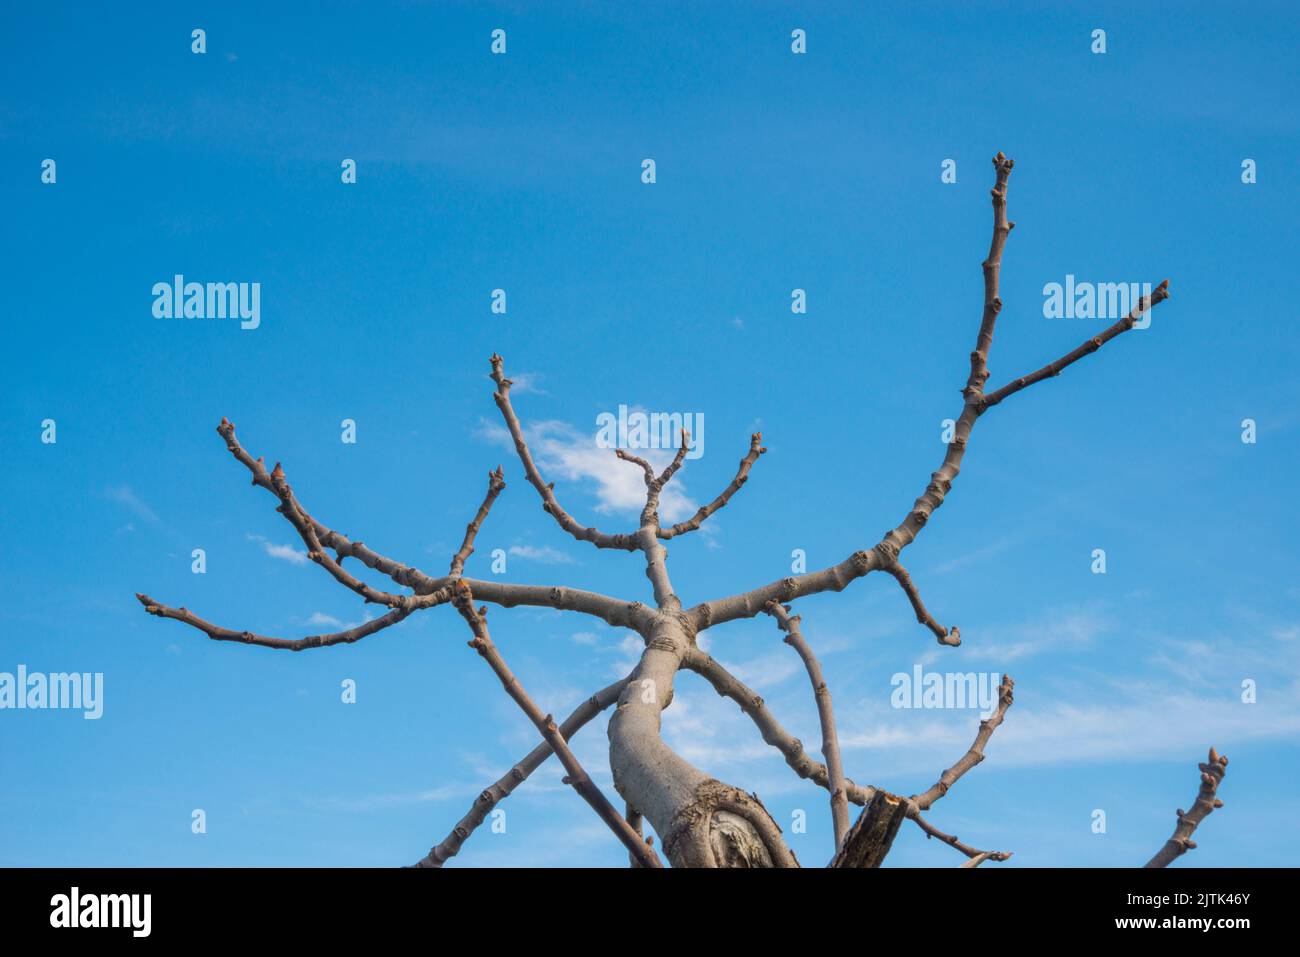 Branches on sky blue. Stock Photo